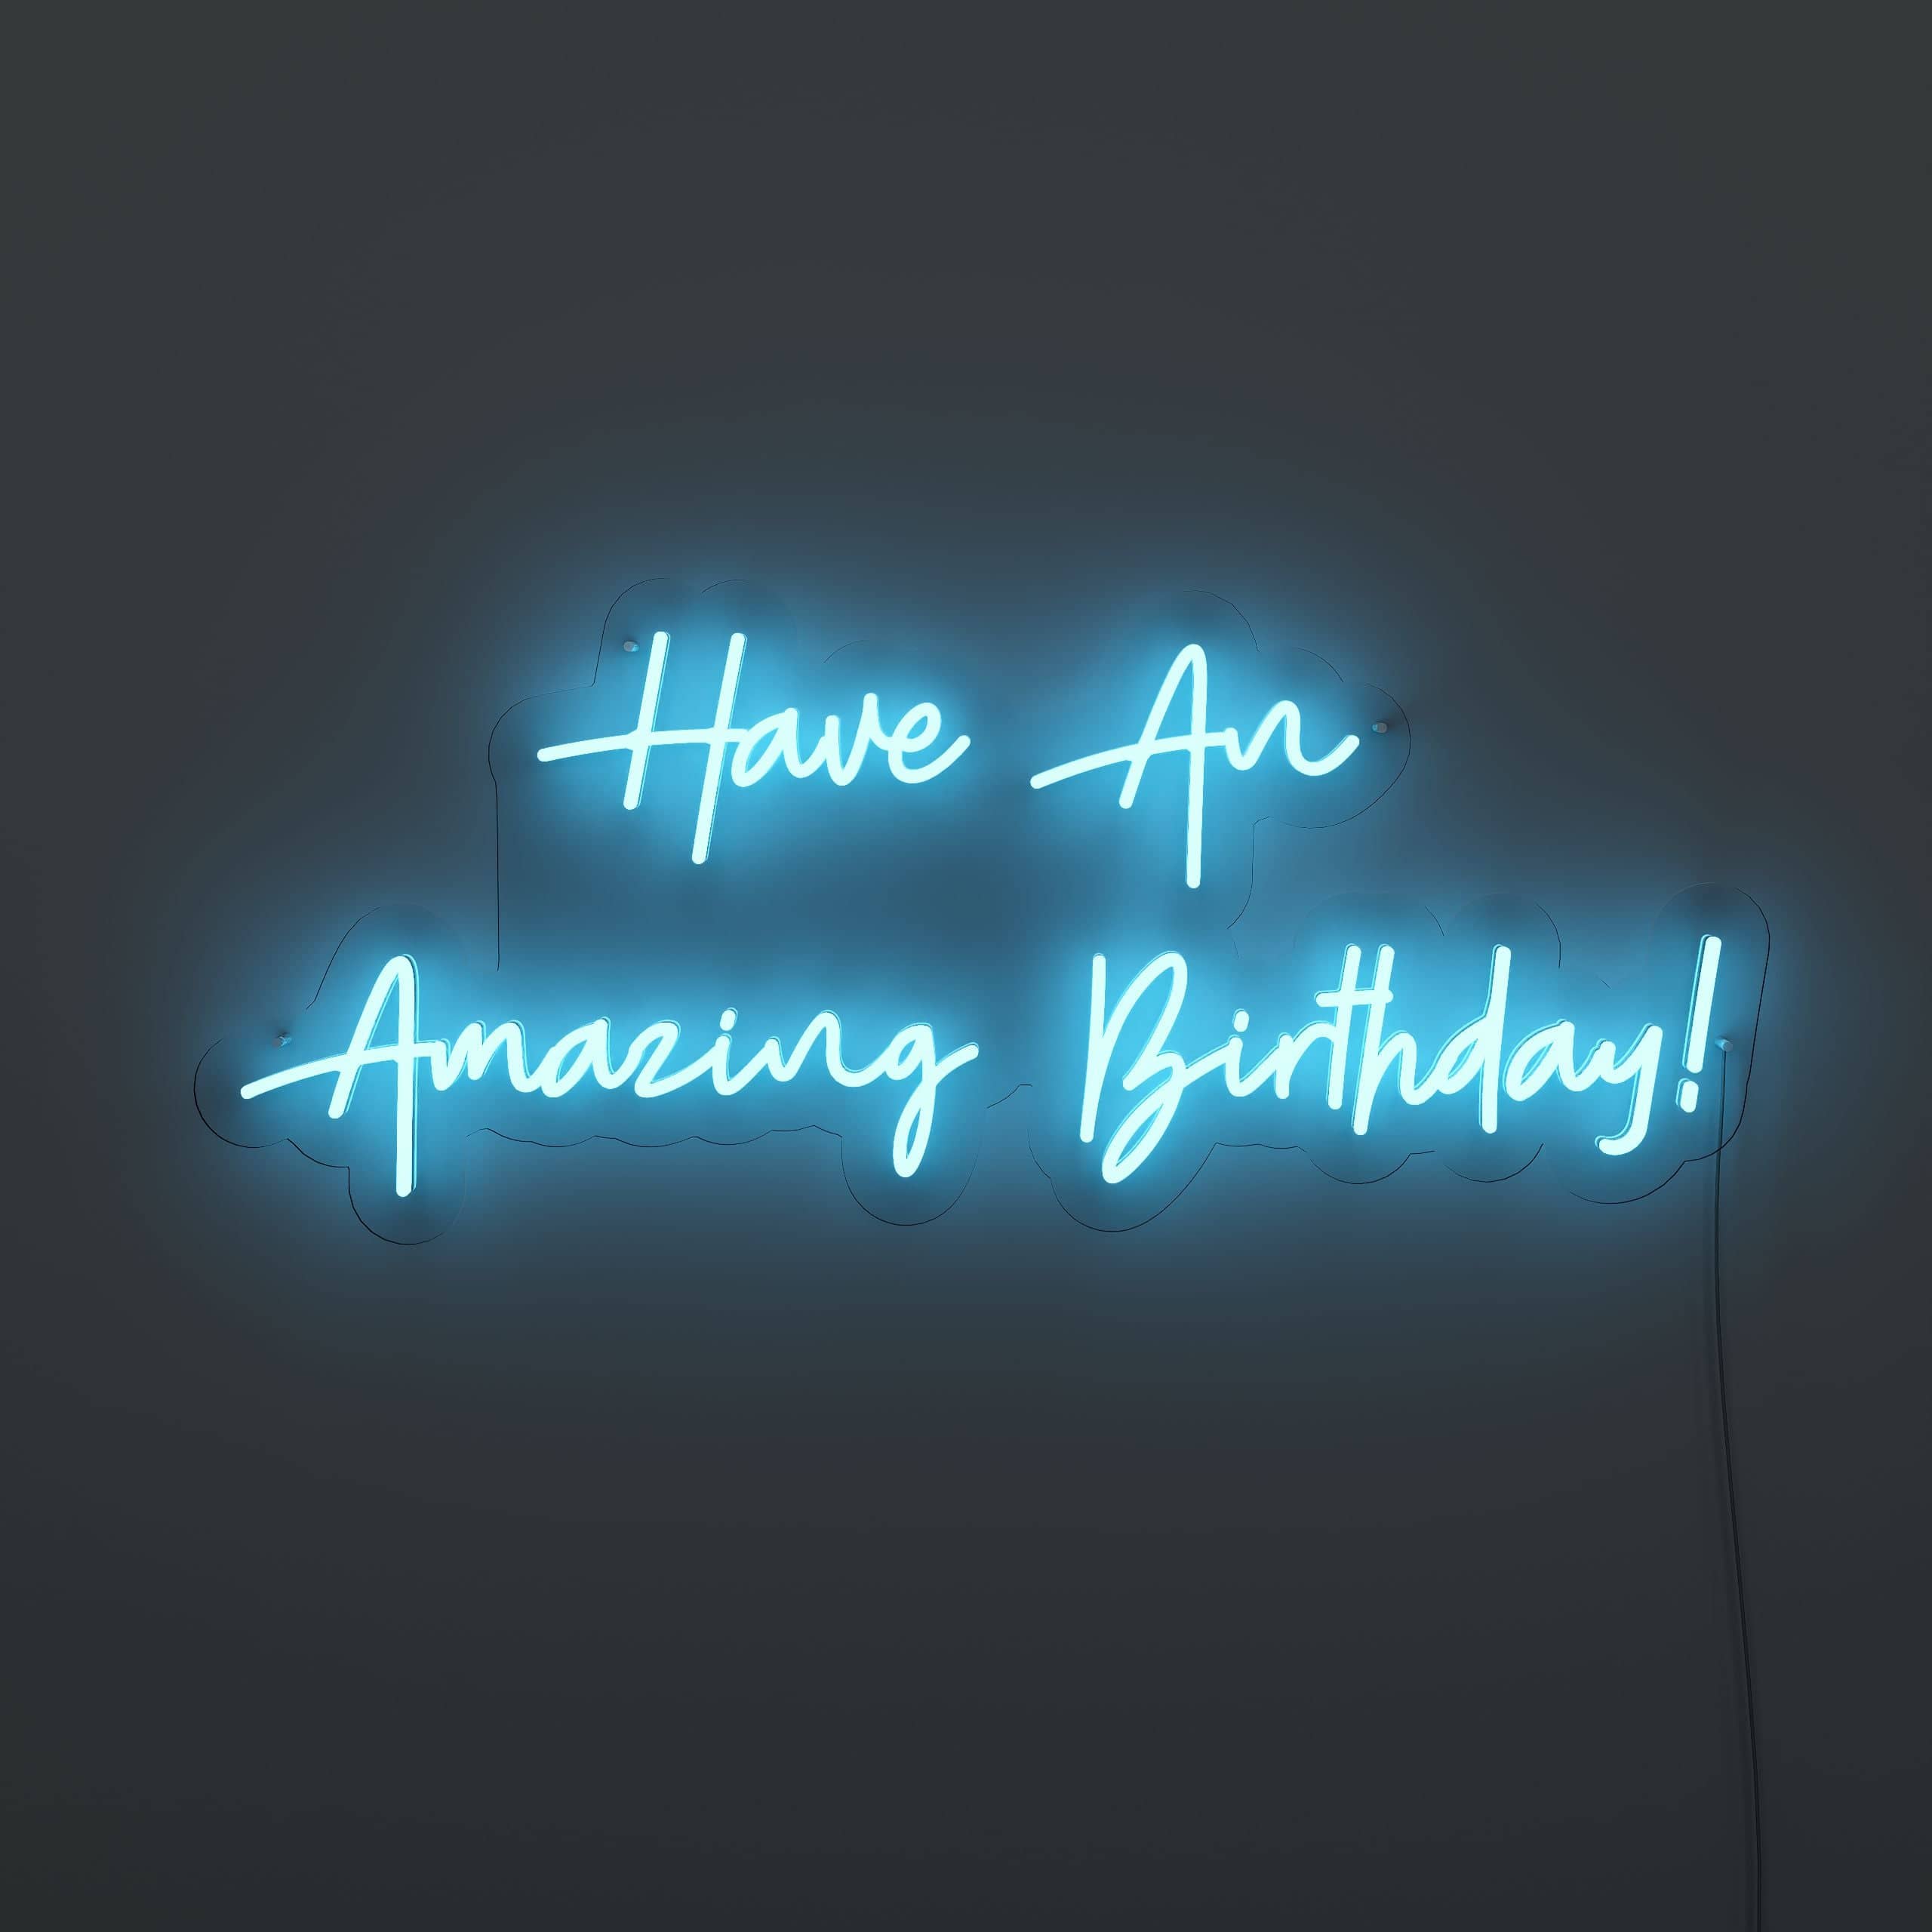 may-your-birthday-be-filled-with-joy-and-surprises!-neon-sign-lite